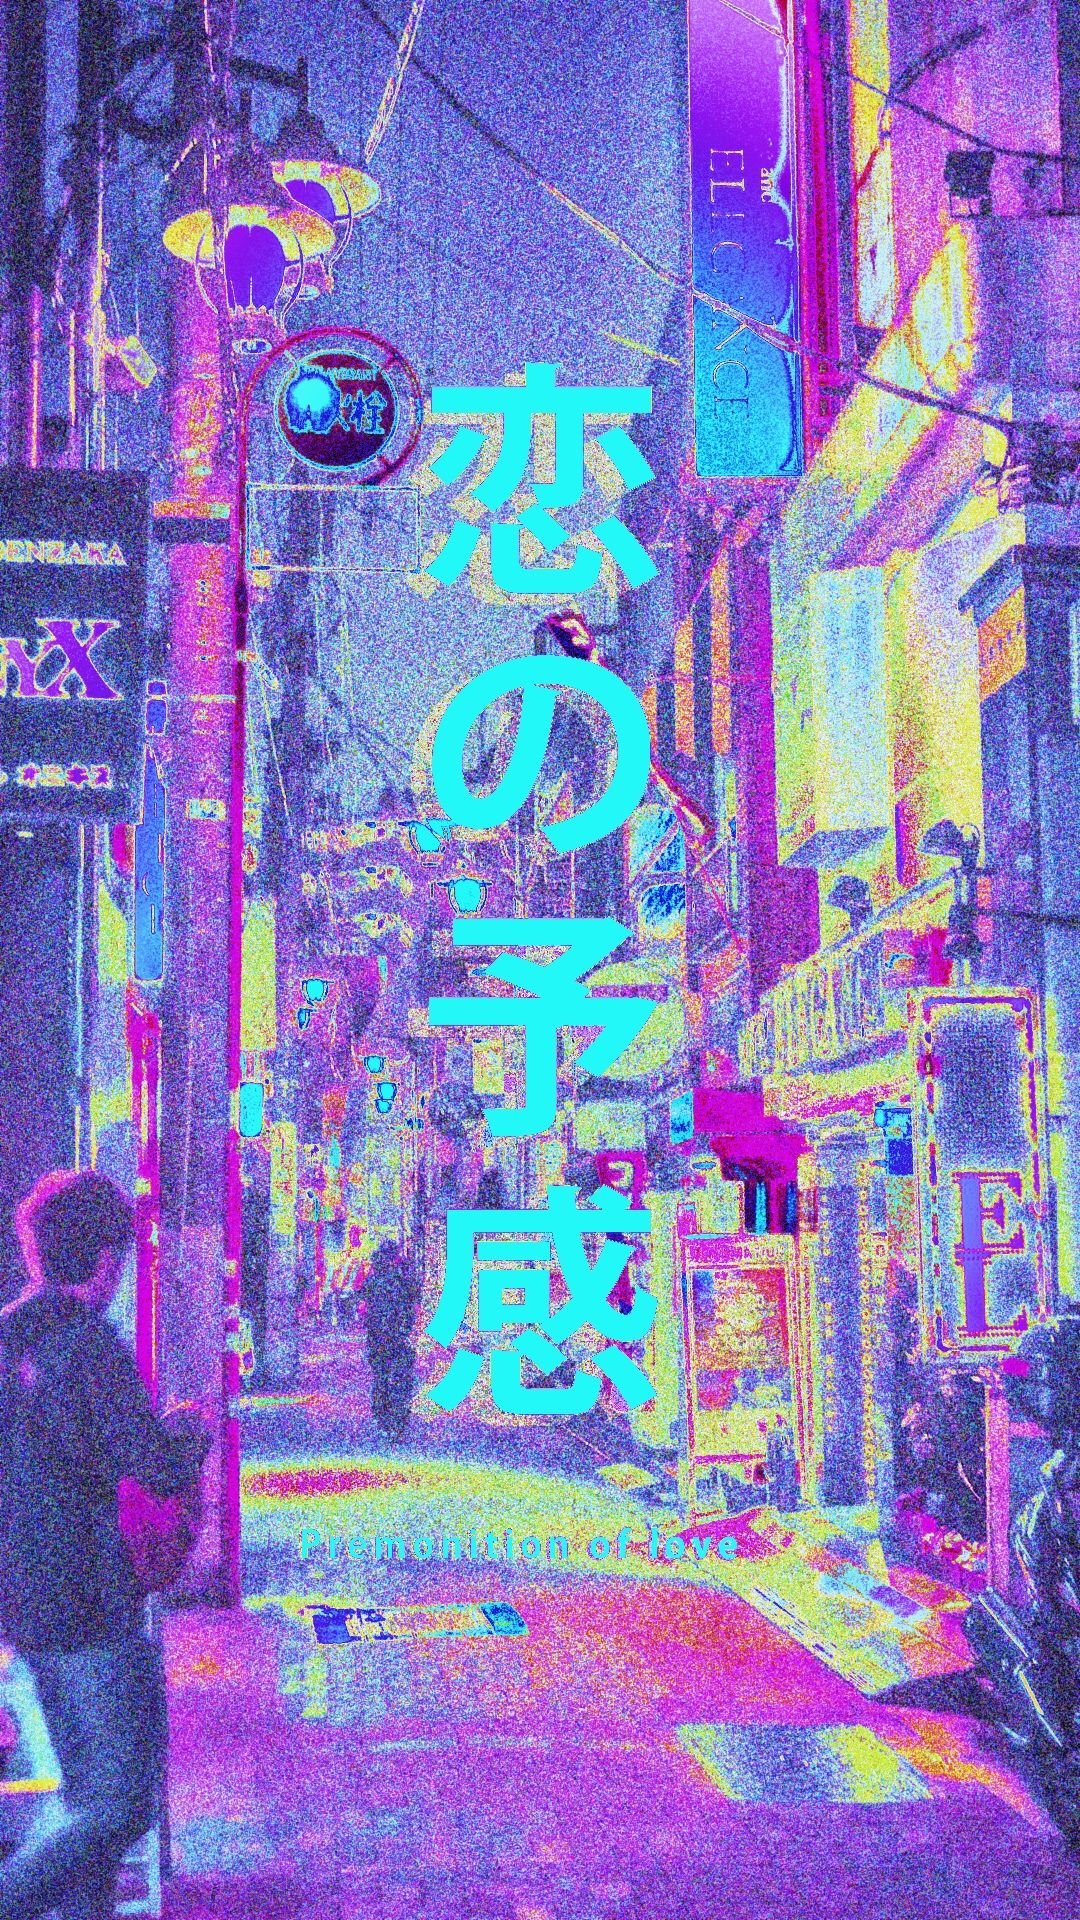 AESTHETIC VAPORWAVE PHONE WALLPAPER COLLECTION 192  Vaporwave wallpaper  Wallpapers vintage Aesthetic wallpapers